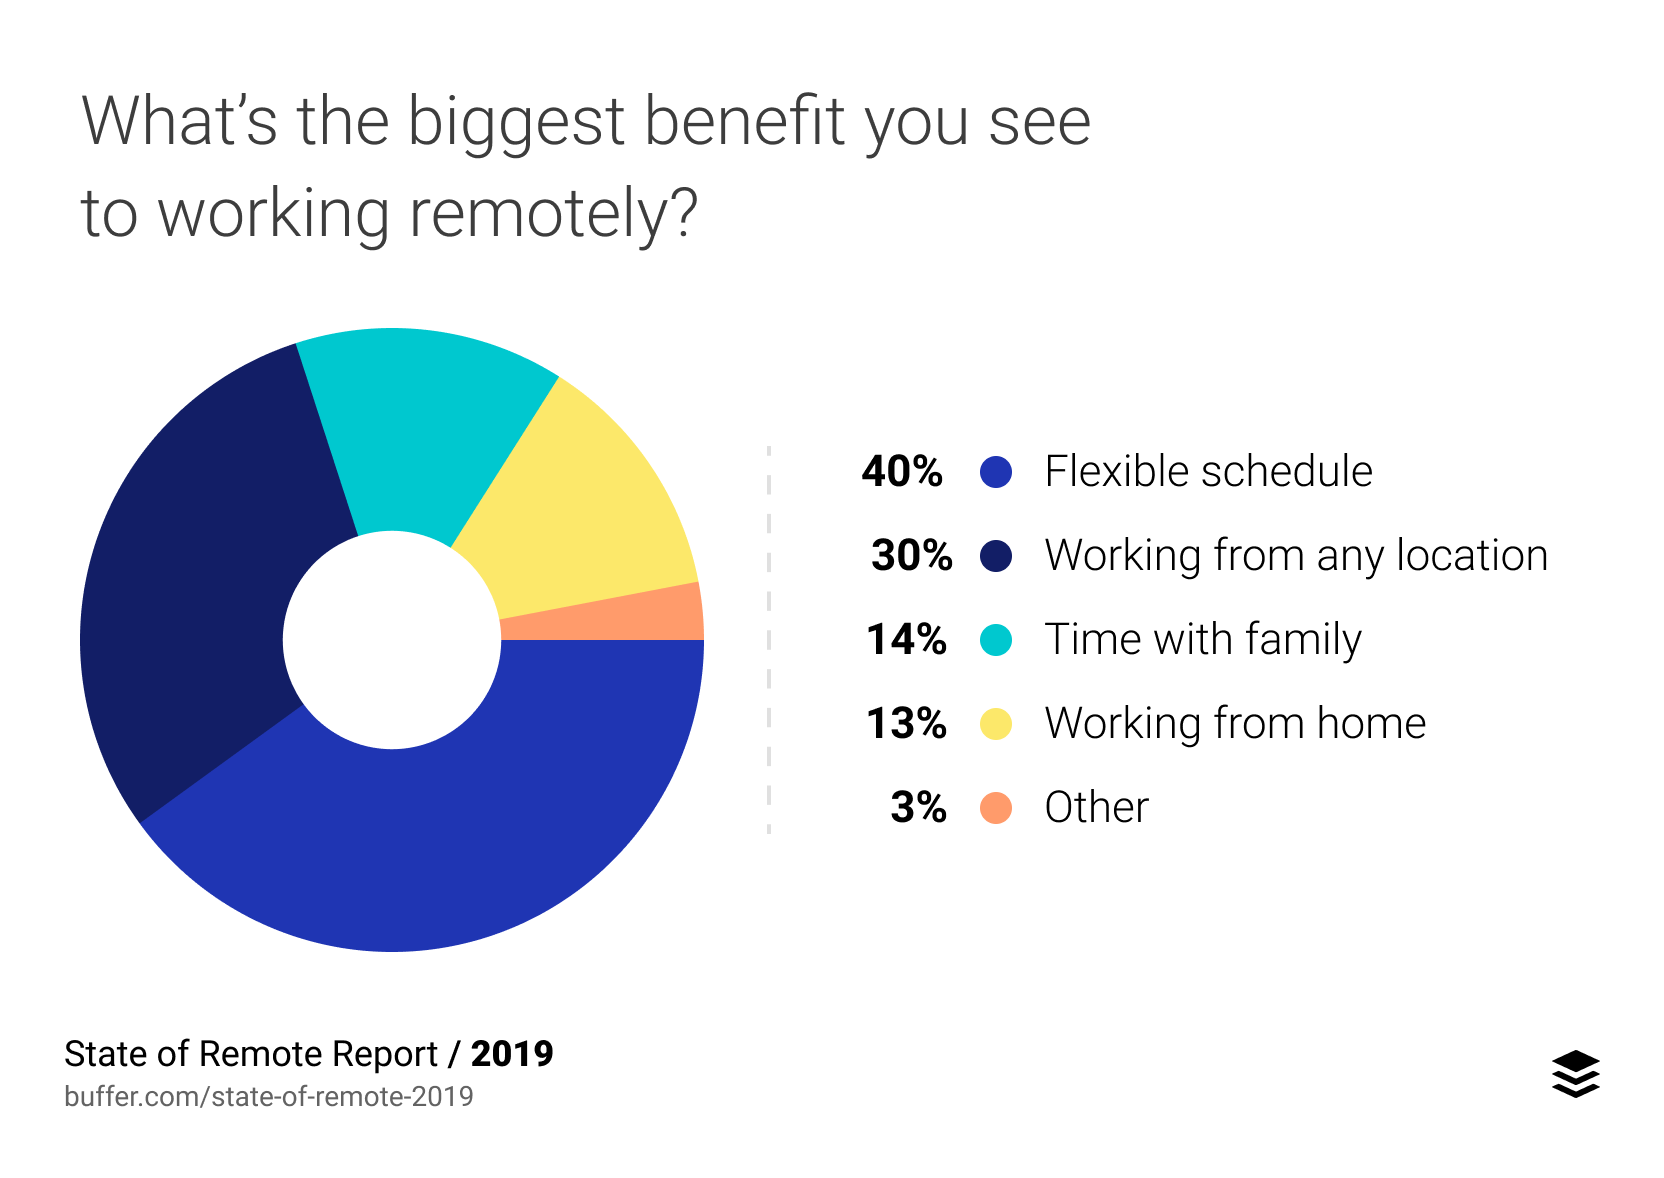 What’s the biggest benefit you see to working remotely?